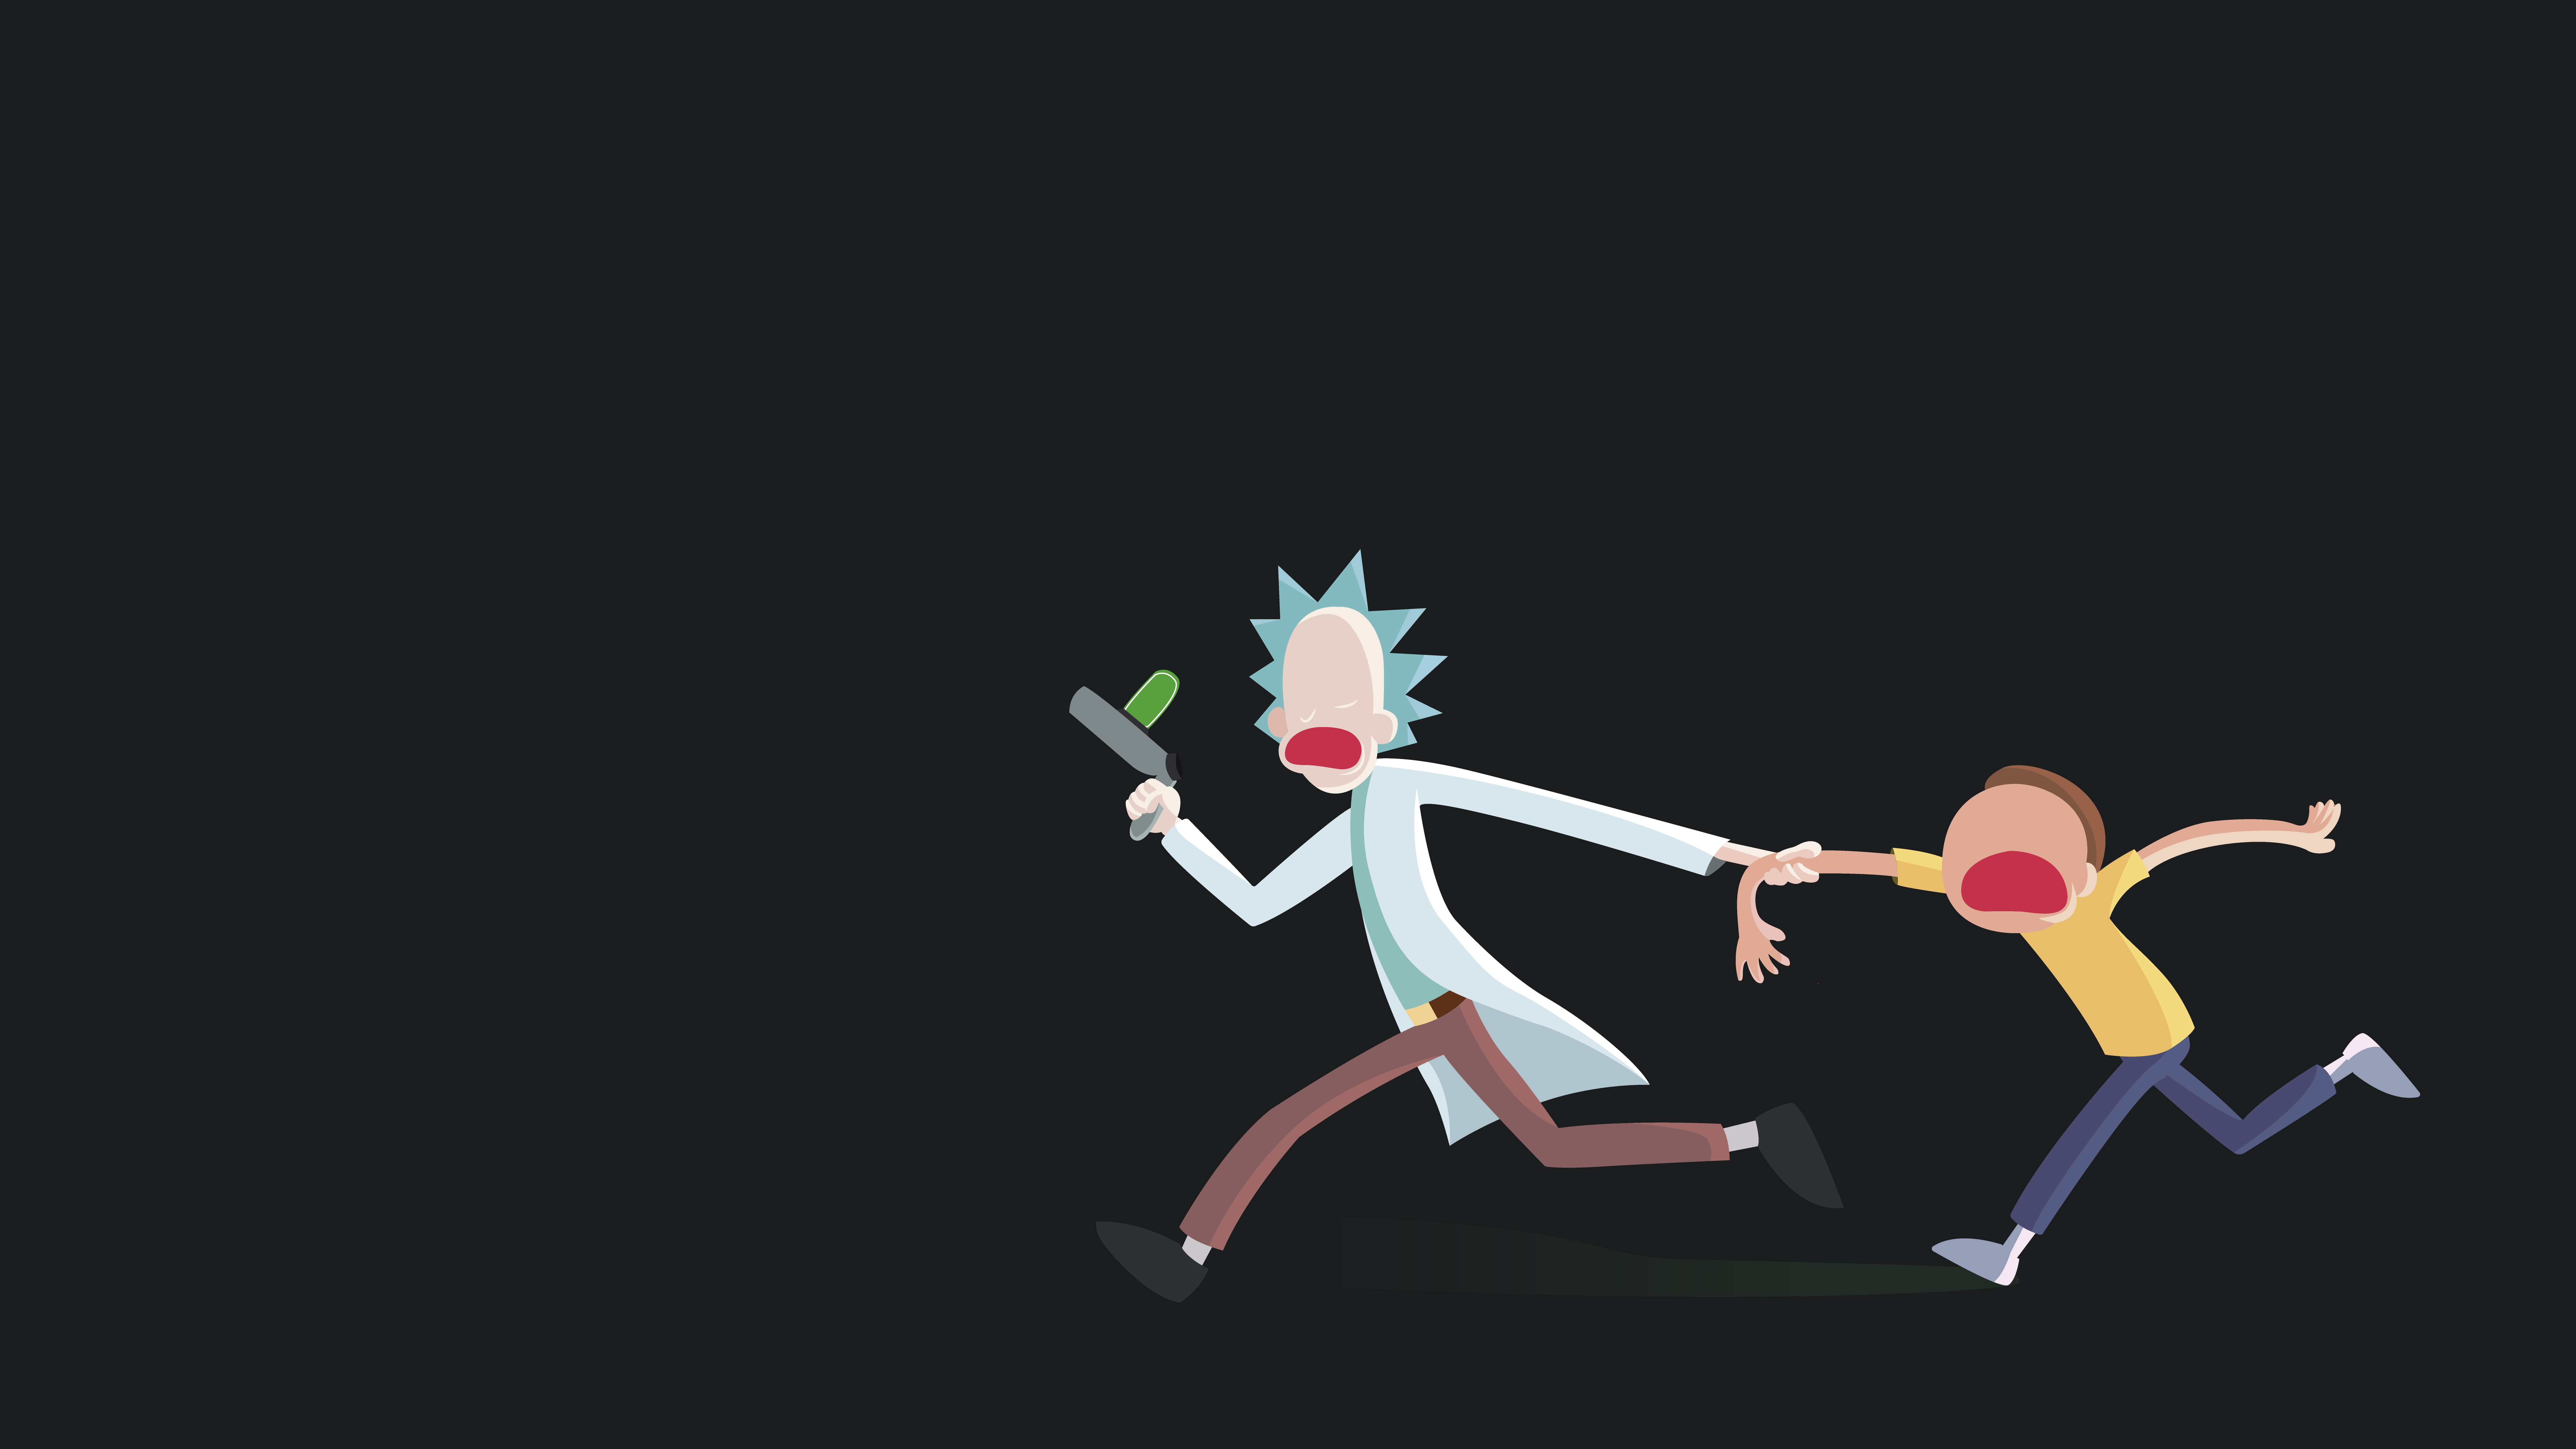 Minimal Rick and Morty by Theztret00. Rick and Morty. My